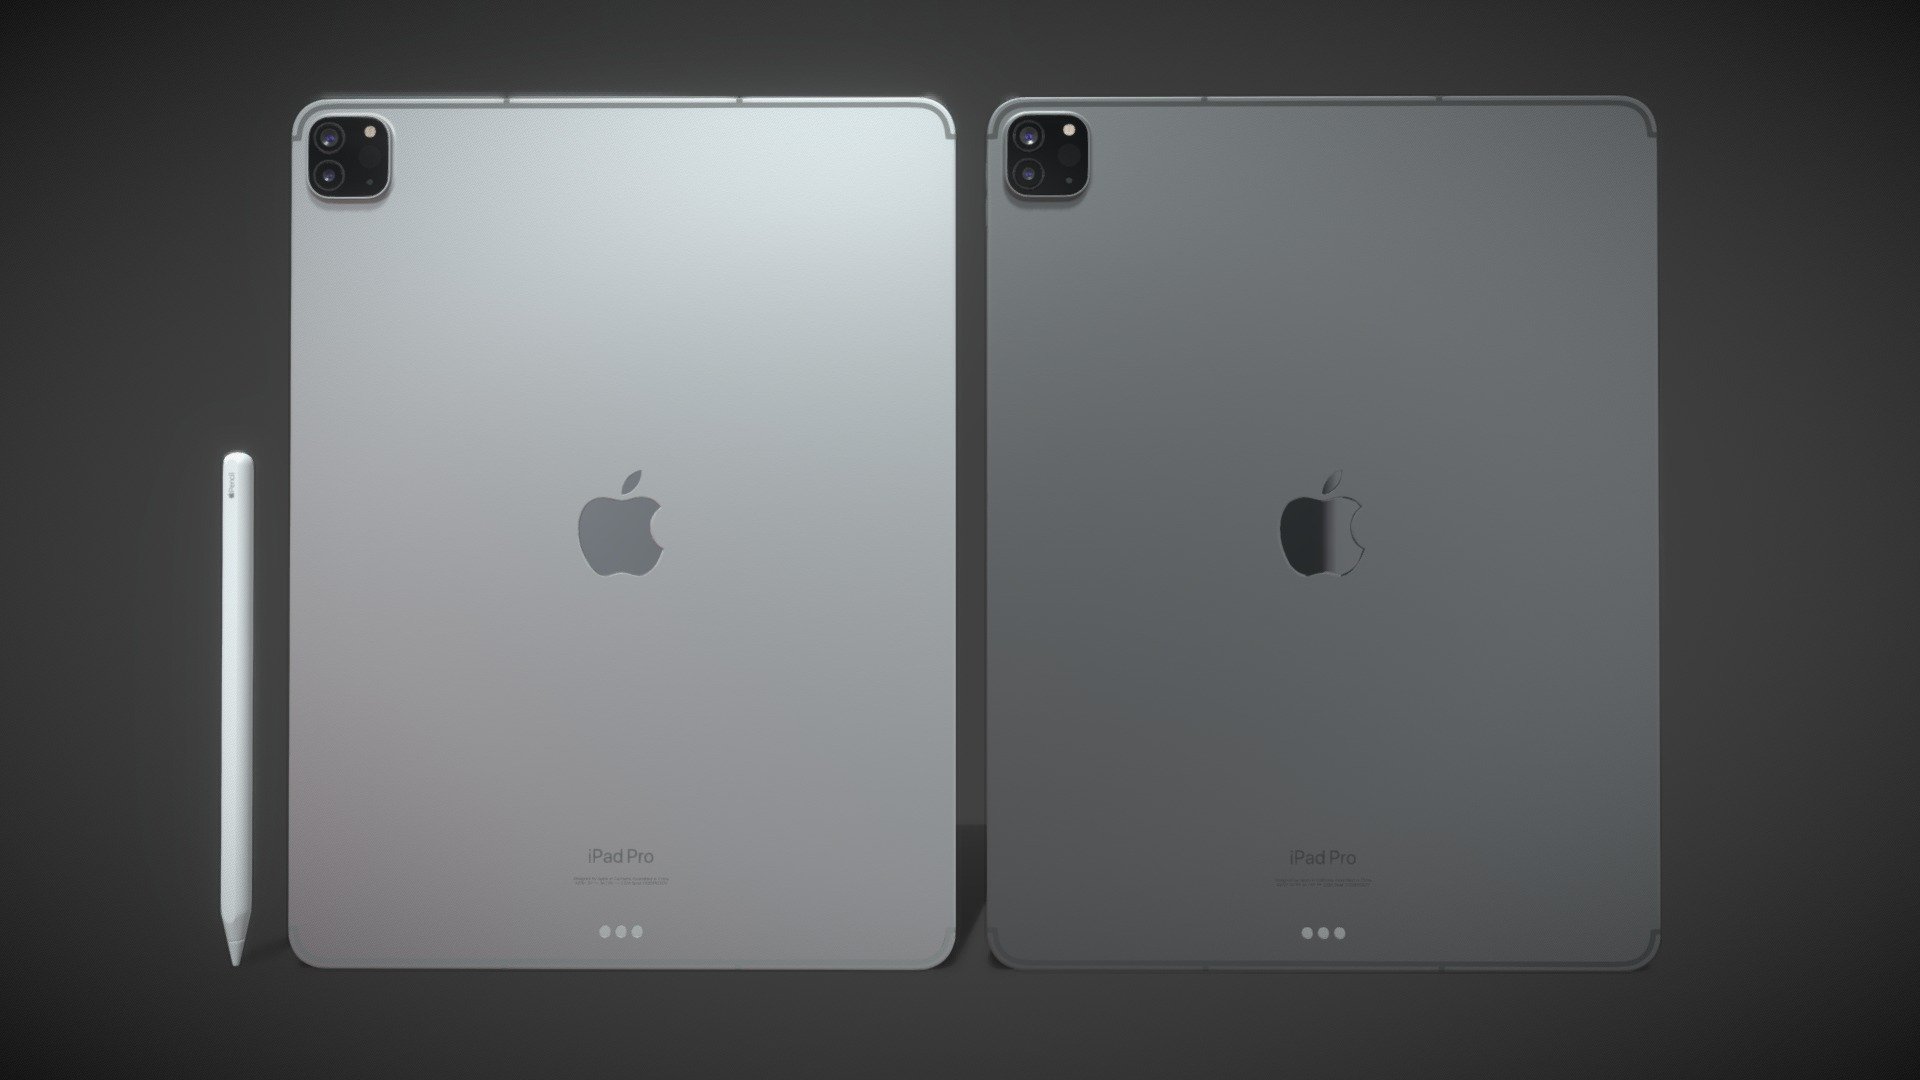 Realistic (copy) 3d model of Apple iPad Pro 12.9-inch M2.

This set:
- 1 file obj standard
- 1 file 3ds Max 2013 vray material
- 1 file 3ds Max 2013 corona material
- 1 file of 3Ds
- 2 file e3d full set of materials.
- 1 file cinema 4d standard.
- 1 file blender cycles.

Topology of geometry:
- forms and proportions of The 3D model
- the geometry of the model was created very neatly
- there are no many-sided polygons
- detailed enough for close-up renders
- the model optimized for turbosmooth modifier
- Not collapsed the turbosmooth modified
- apply the Smooth modifier with a parameter to get the desired level of detail

Materials and Textures:
- 3ds max files included Vray-Shaders
- 3ds max files included Corona-Shaders
- Blender files included cycles shaders
- Cinema 4d files included Standard-Shaders
- Element 3d files
- all texture paths are cleared

Organization of scene:
- to all objects and materials
- real world size (system units - mm)
- coordinates of location of the model in space (x0, y0, z0) - Apple iPad Pro 12.9-inch M2 - Buy Royalty Free 3D model by madMIX 3d model